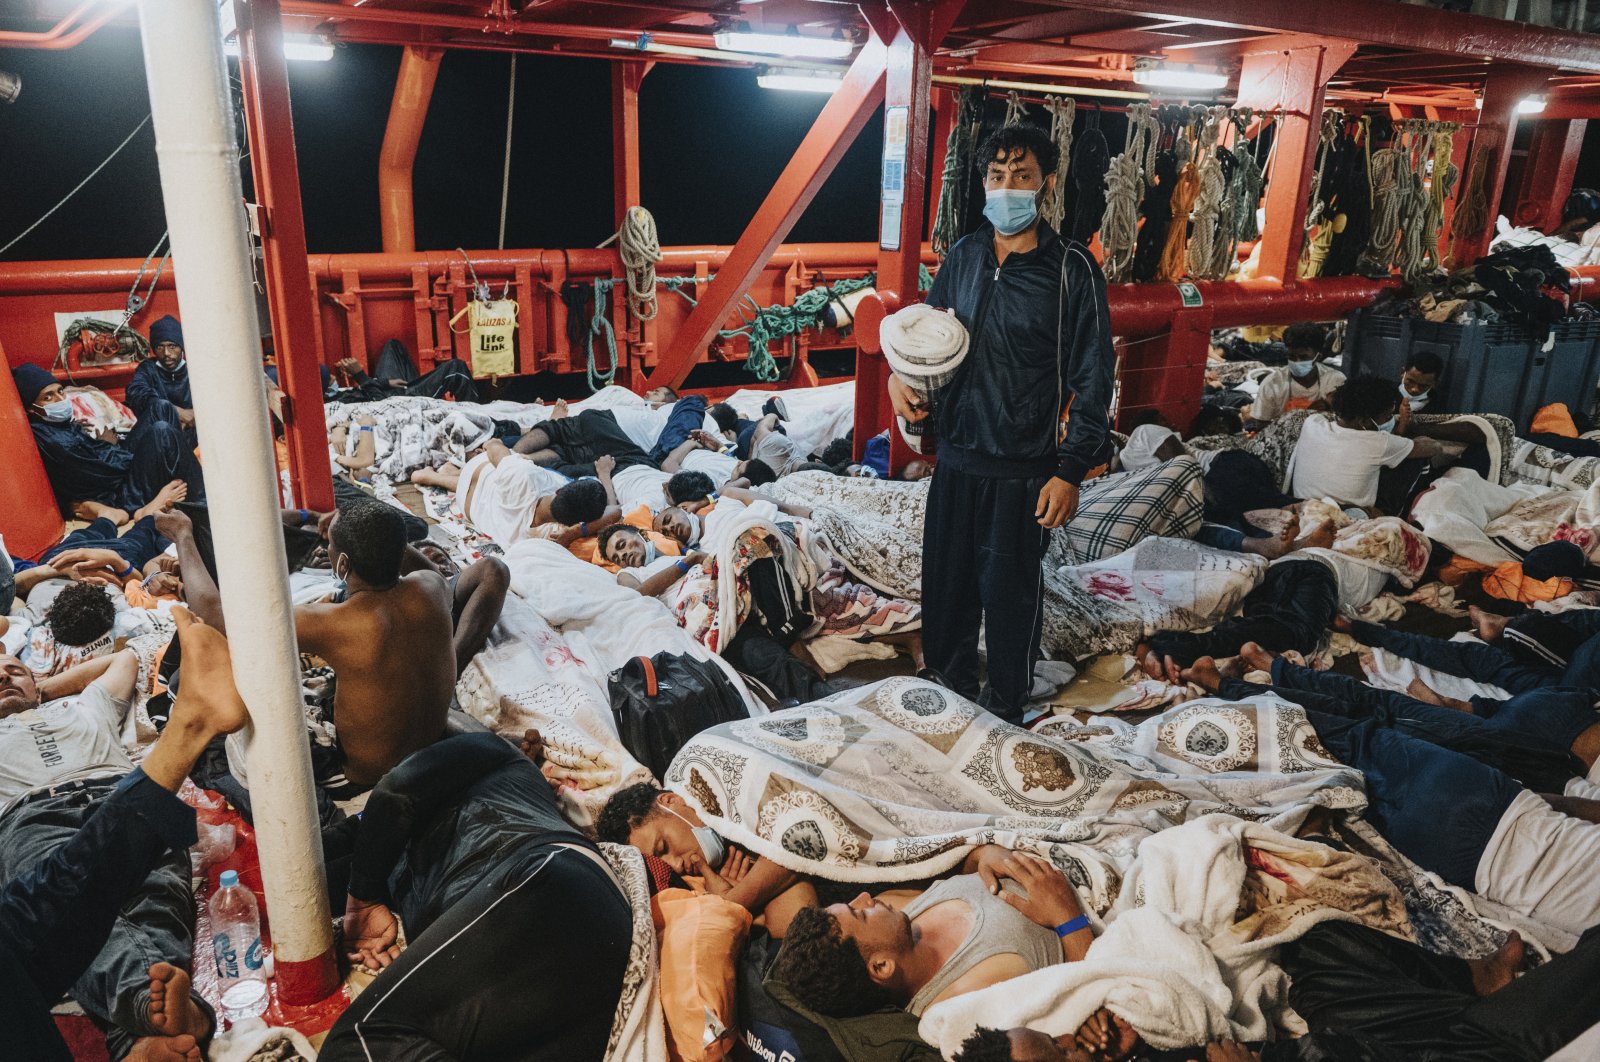 Rescued migrants sleep on the deck of the Ocean Viking rescue ship in the Mediterranean Sea, July 8, 2021. (AP Photo)